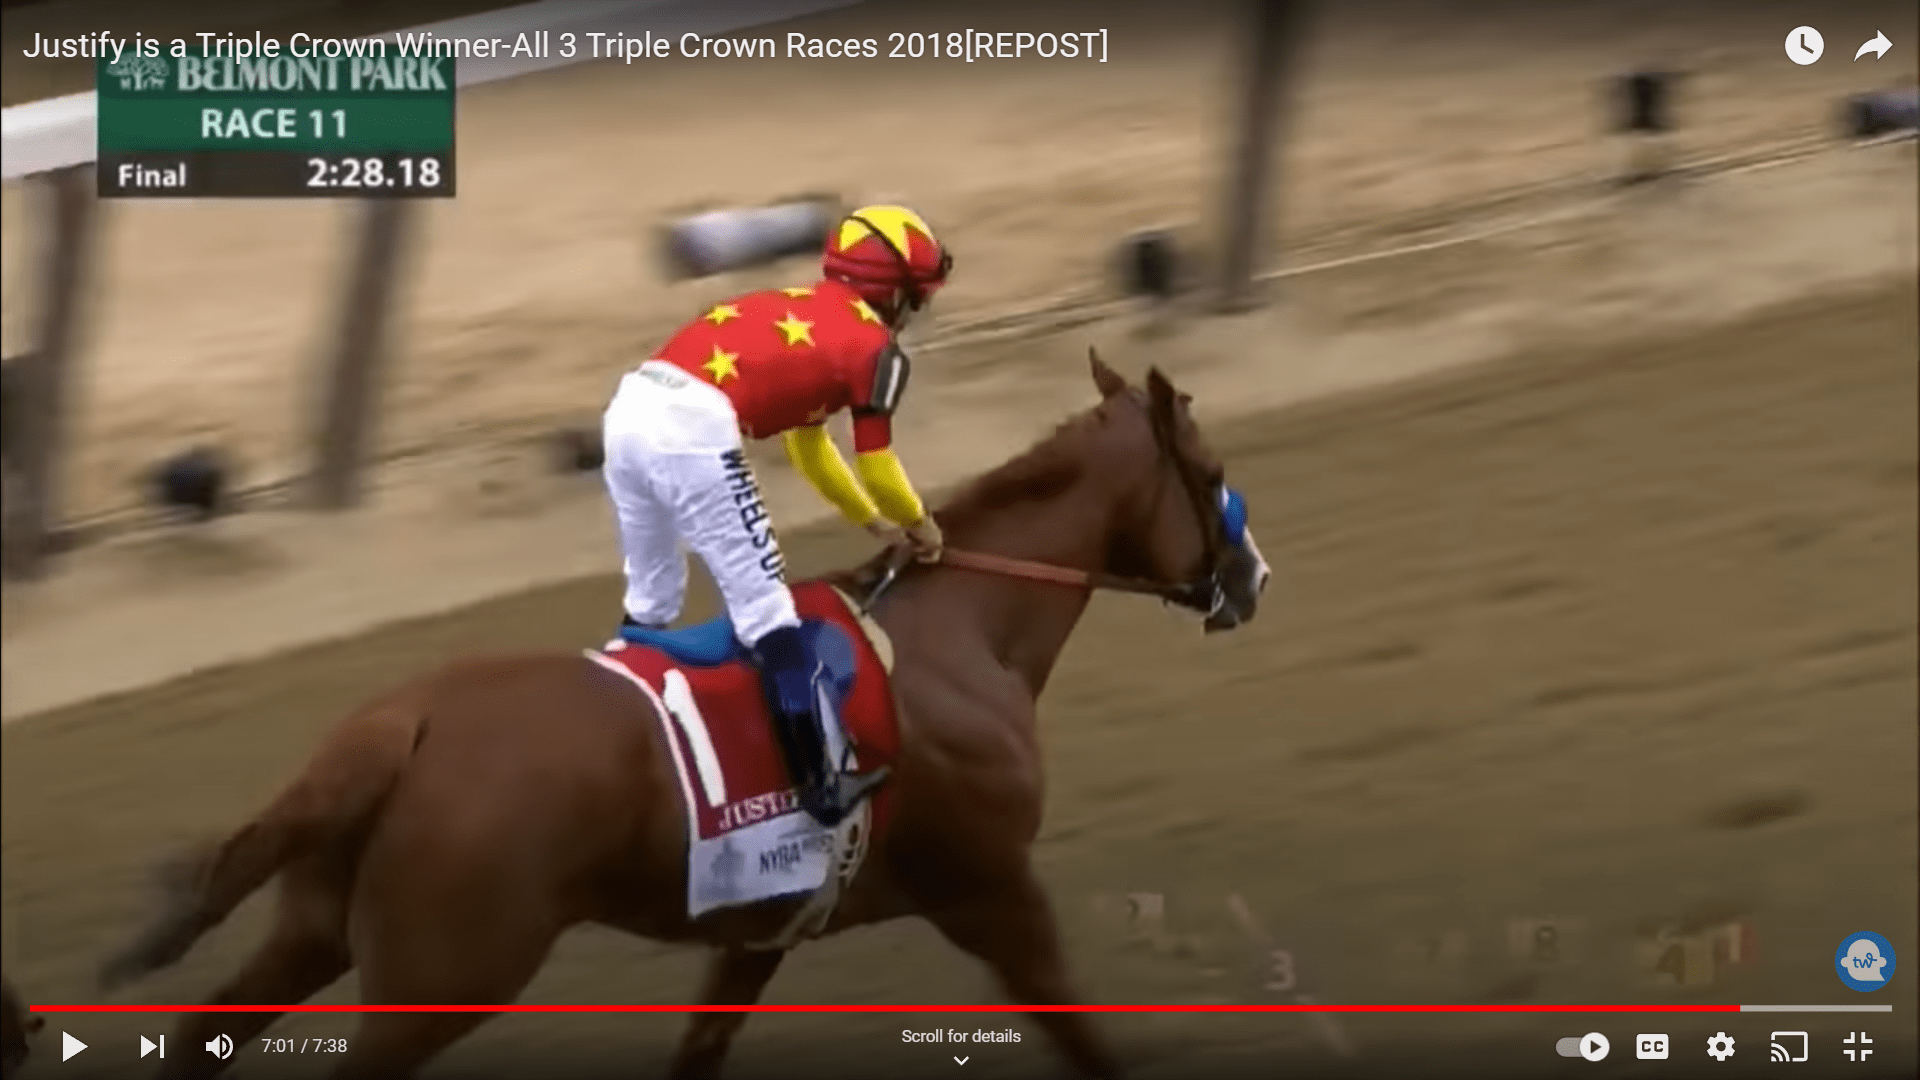 Video Of Justify In The 3 Races Of The Triple Crown